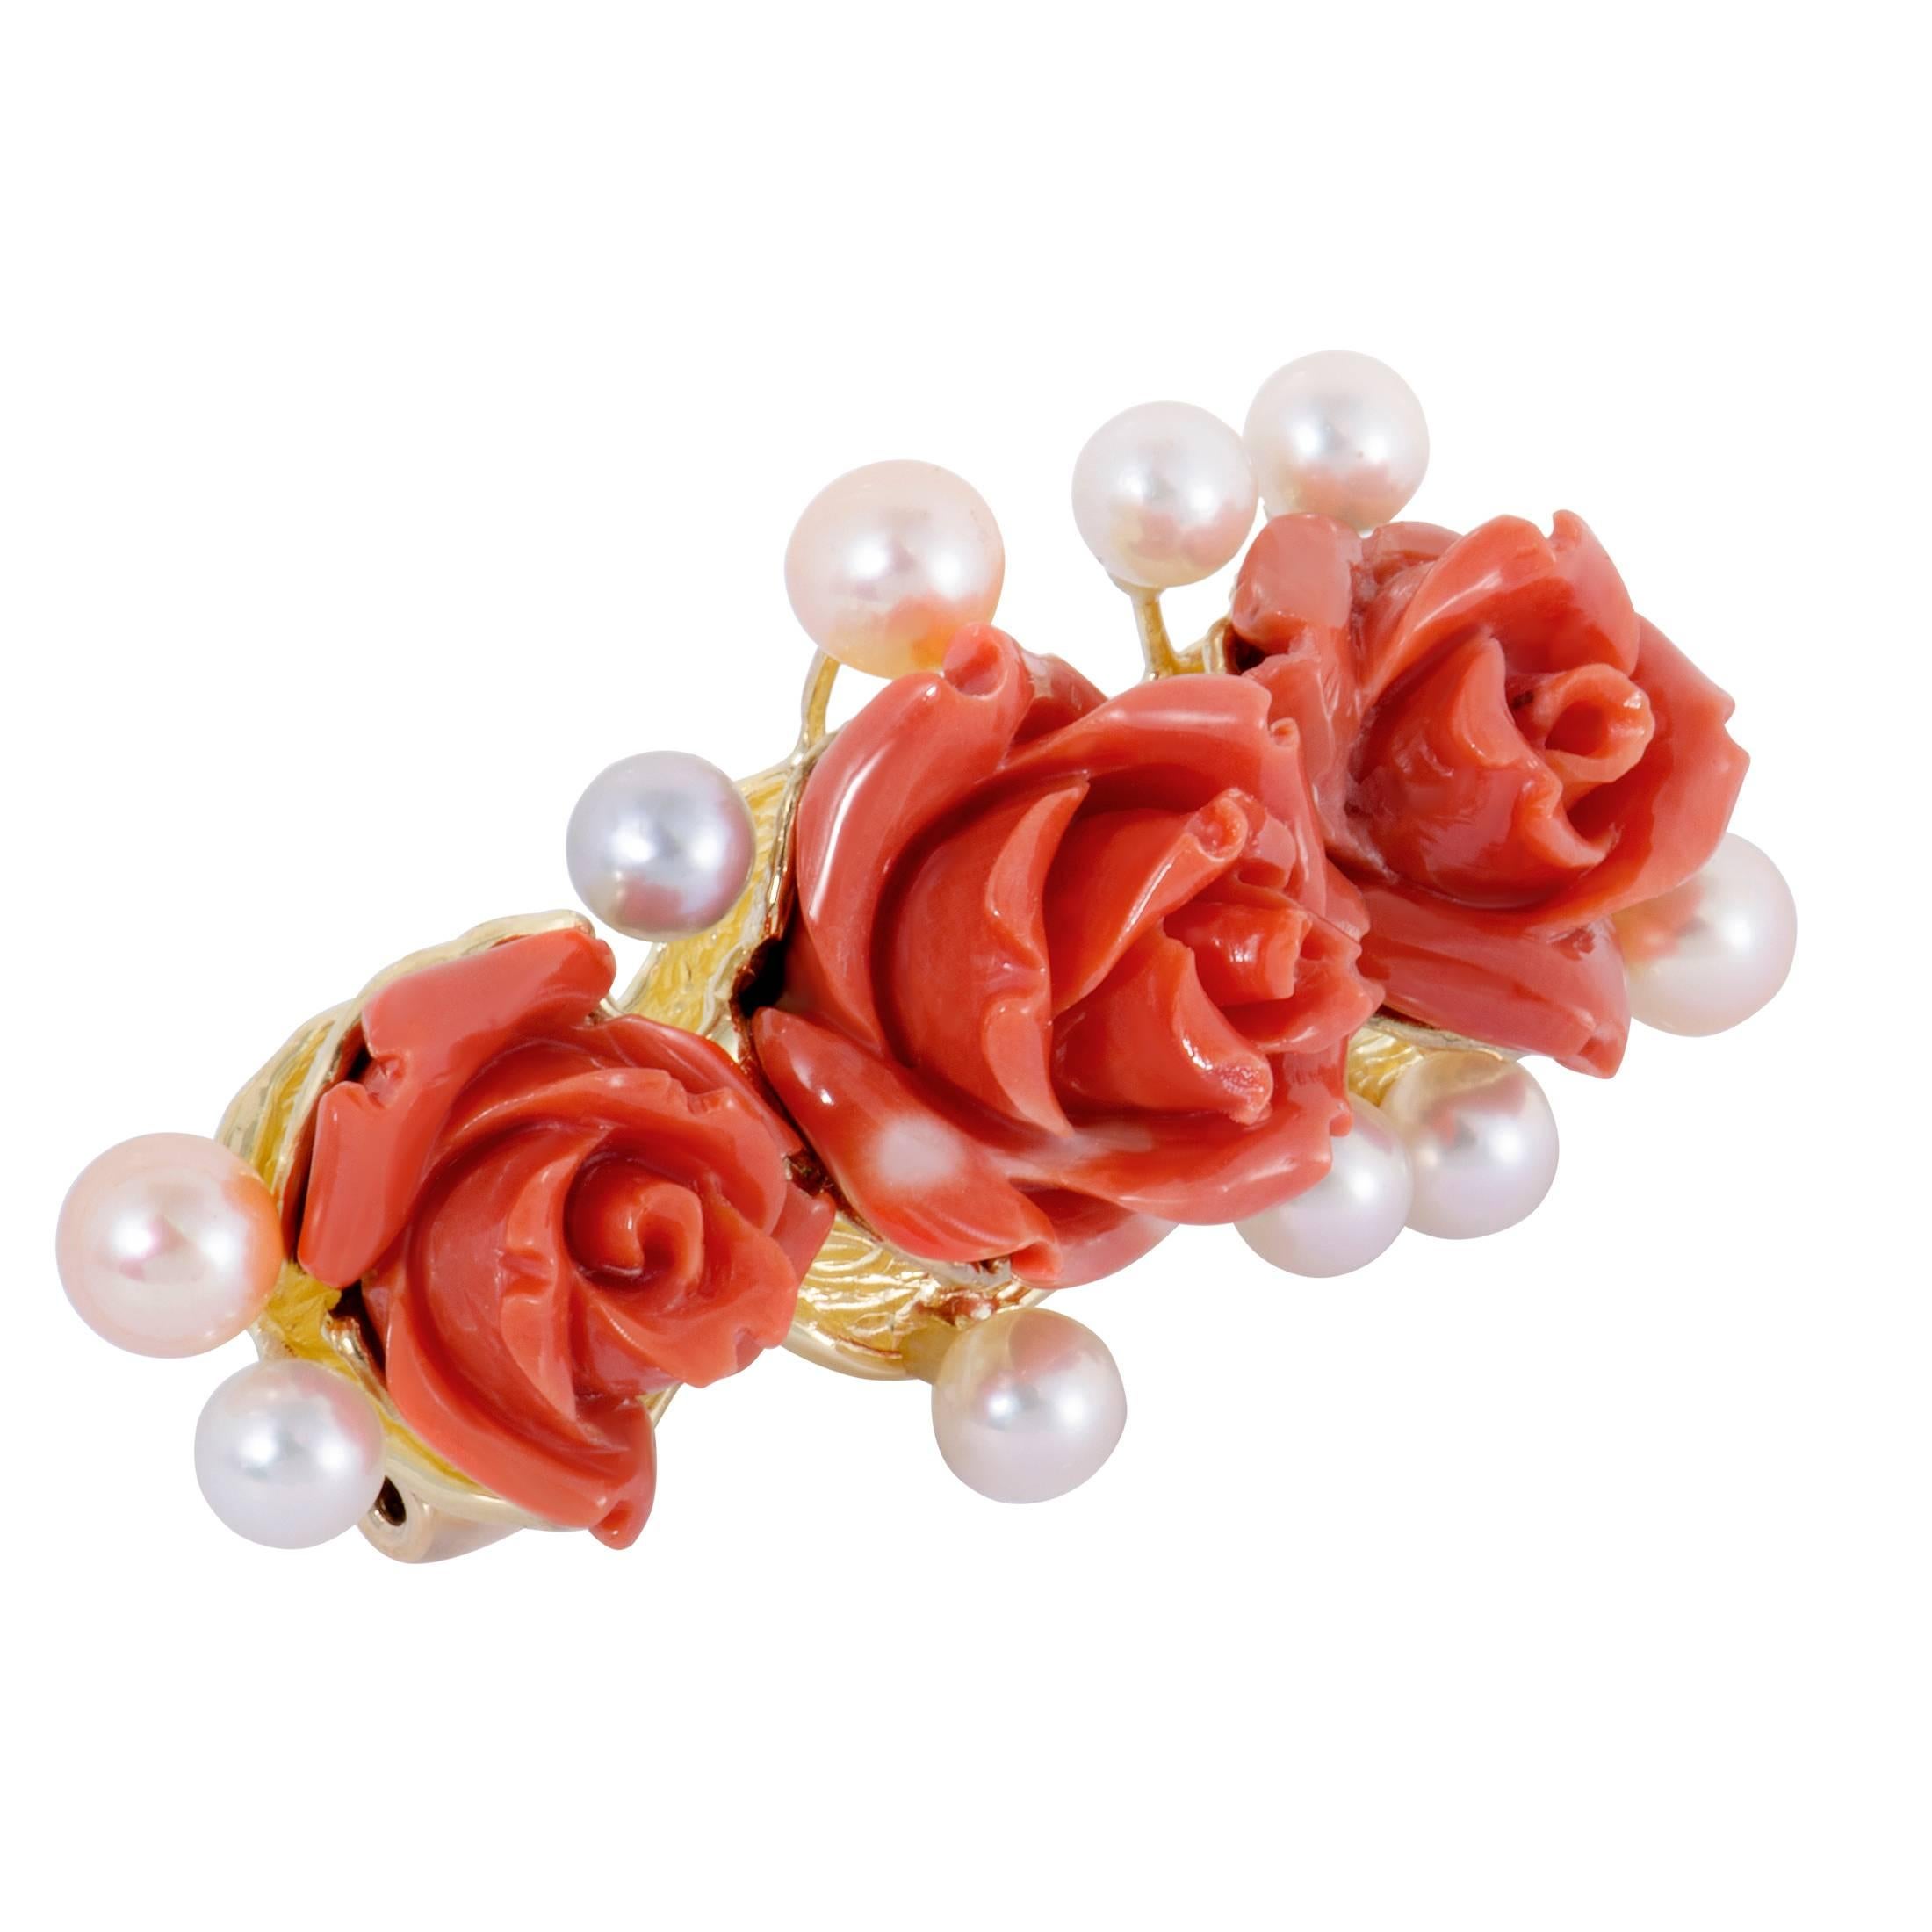 With gorgeously dainty coral flowers taking the central spot - surrounded by sublime pearls - this lovely brooch exudes grace and femininity. The brooch is made of radiant 18K yellow gold and weighs 21 grams.
